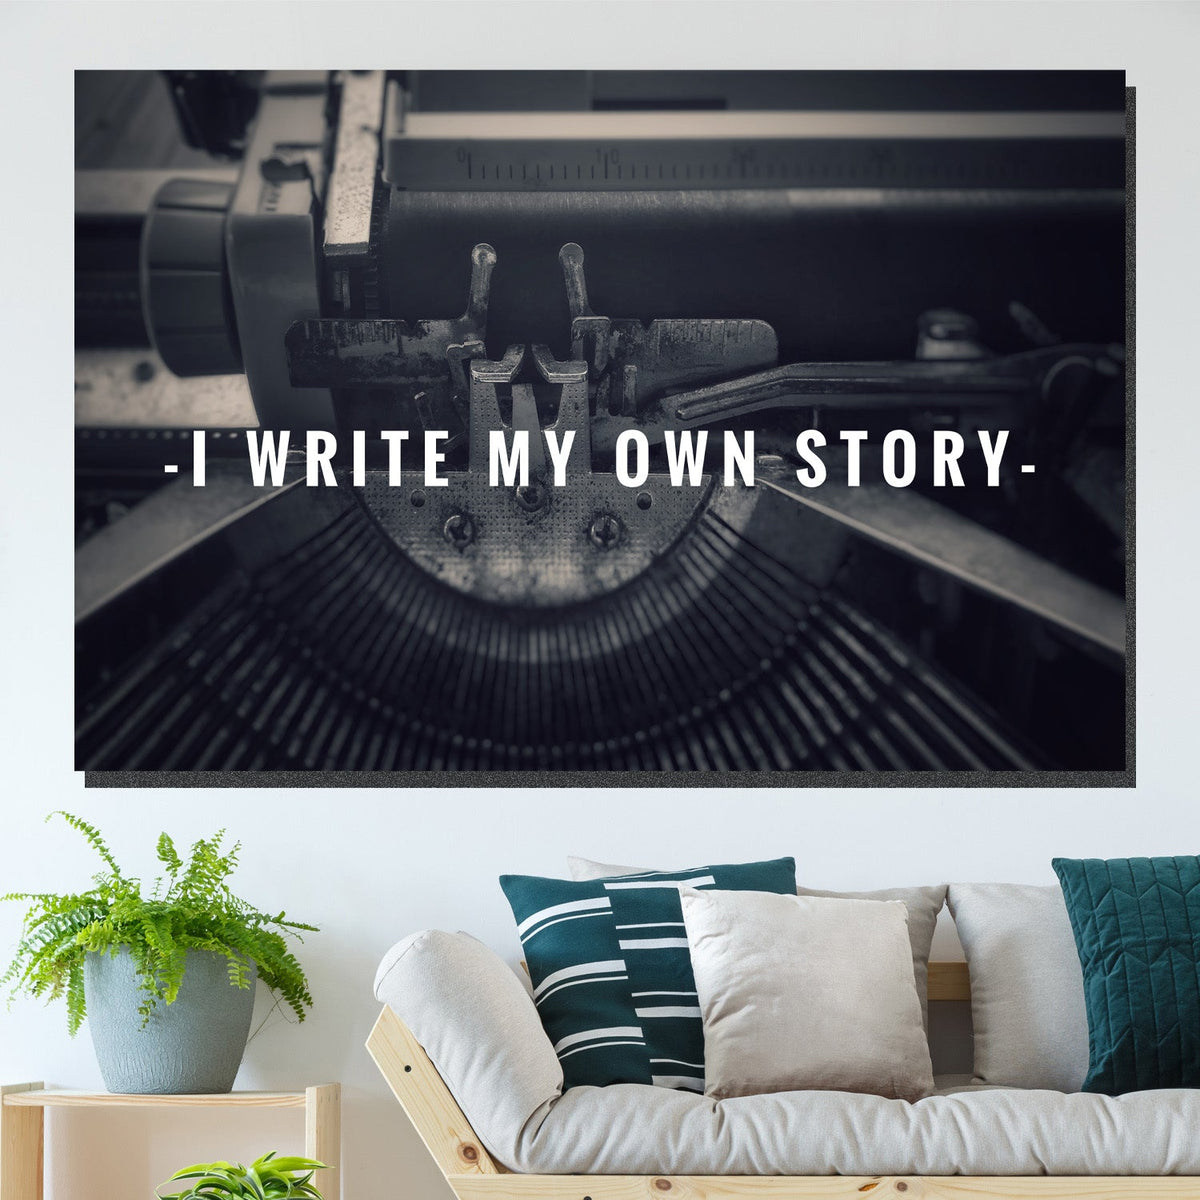 https://cdn.shopify.com/s/files/1/0387/9986/8044/products/IWriteMyOwnStoryCanvasArtprintStretched-1.jpg